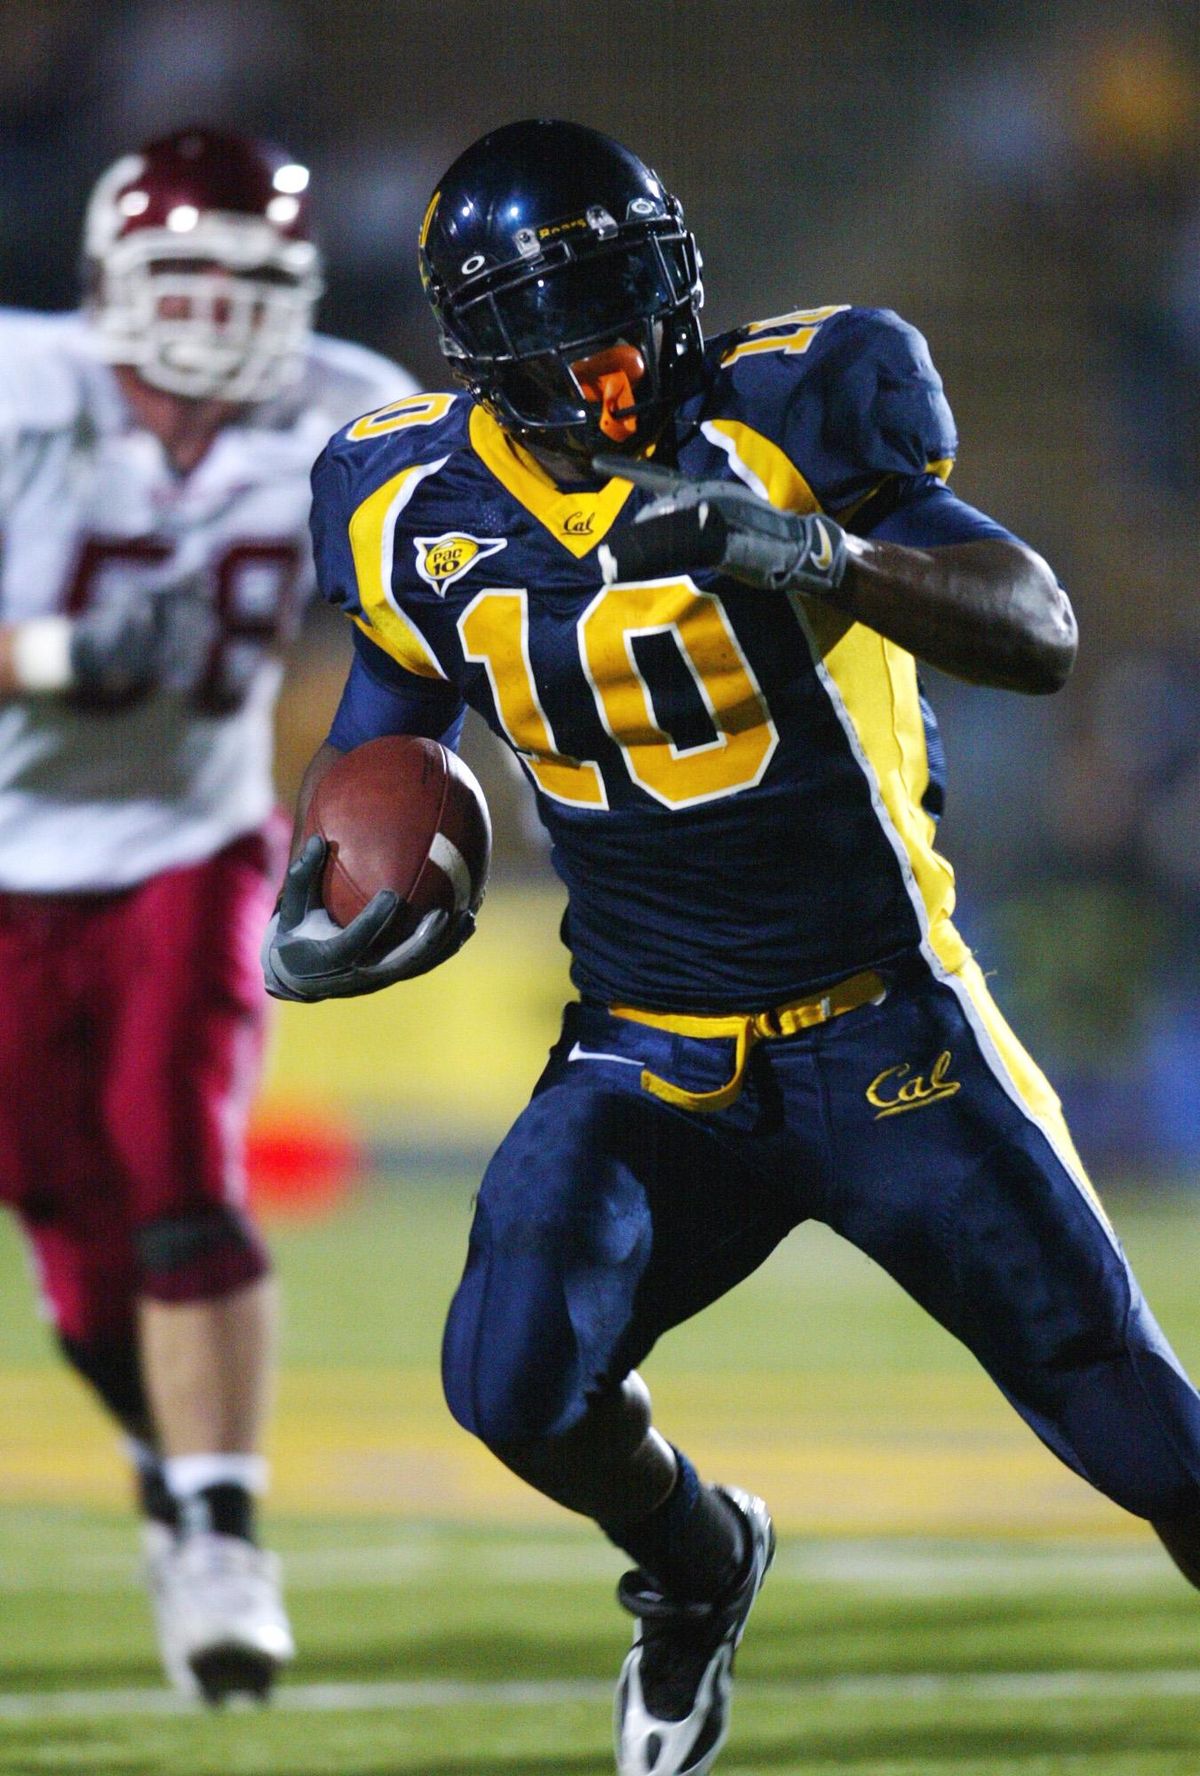 California’s Marshawn Lynch breaks free for a 39-yard touchdown run against Washington State in the first quarter on Oct. 22, 2005, in Berkeley, Calif. The year before, the Cougars put on a full-court press in recruiting Lynch. (D. Ross Cameron / Associated Press)